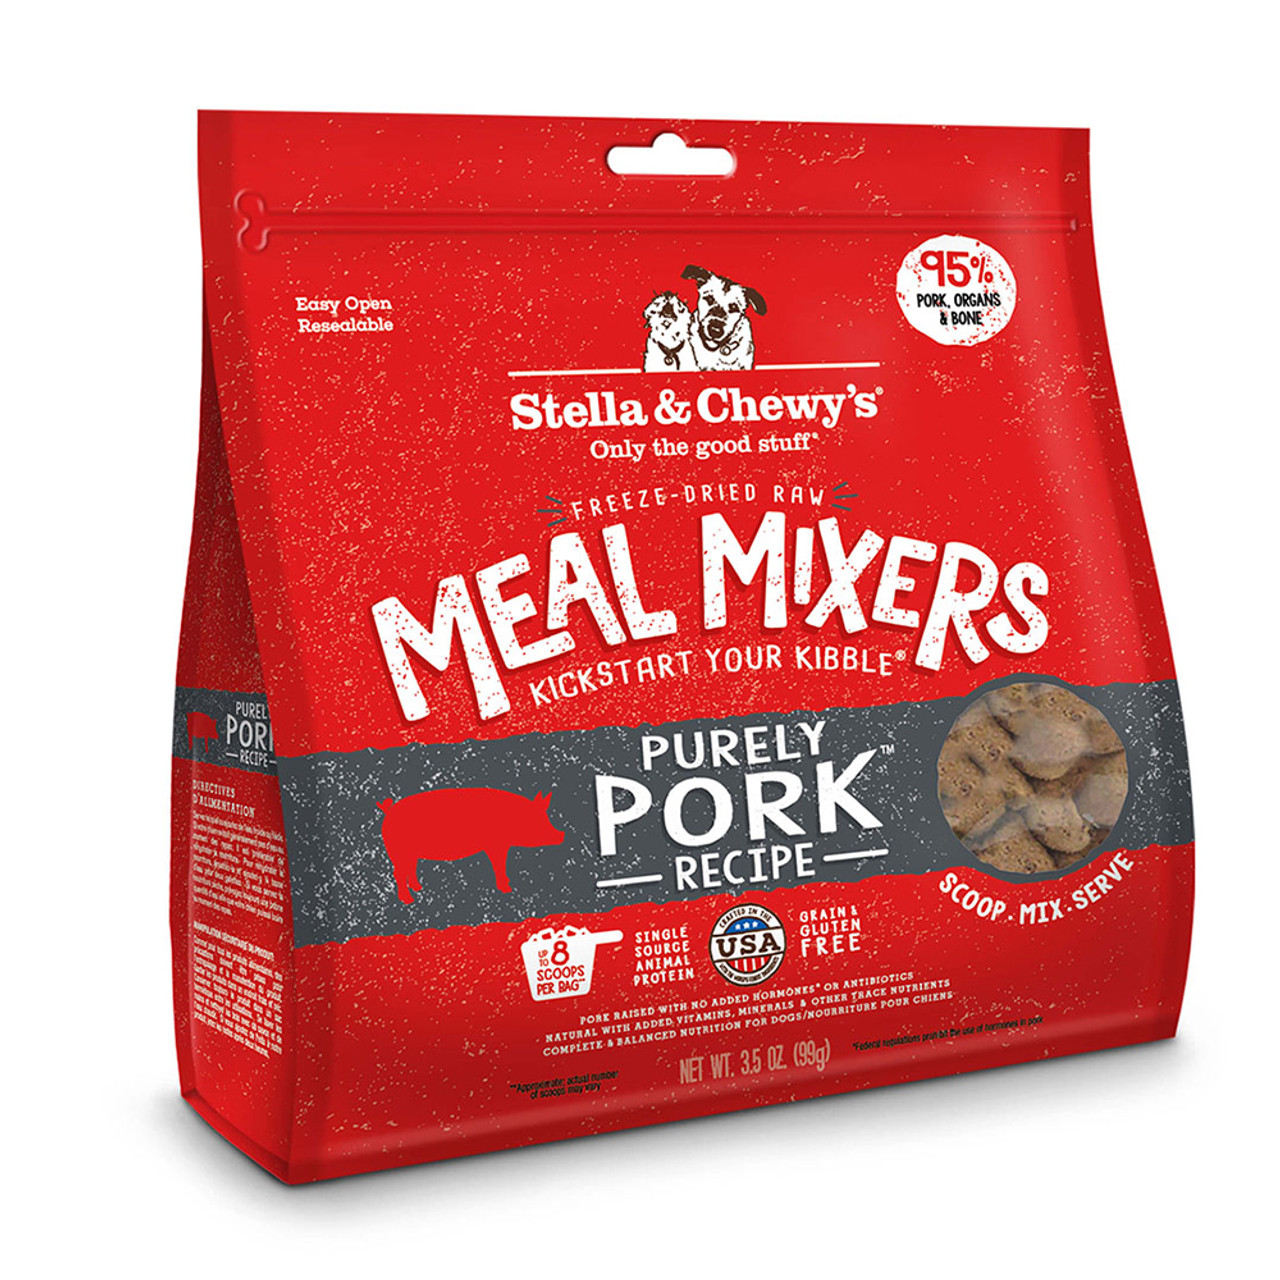 Stella & Chewy's Purely Pork Freeze-Dried Raw Dog Meal Mixers